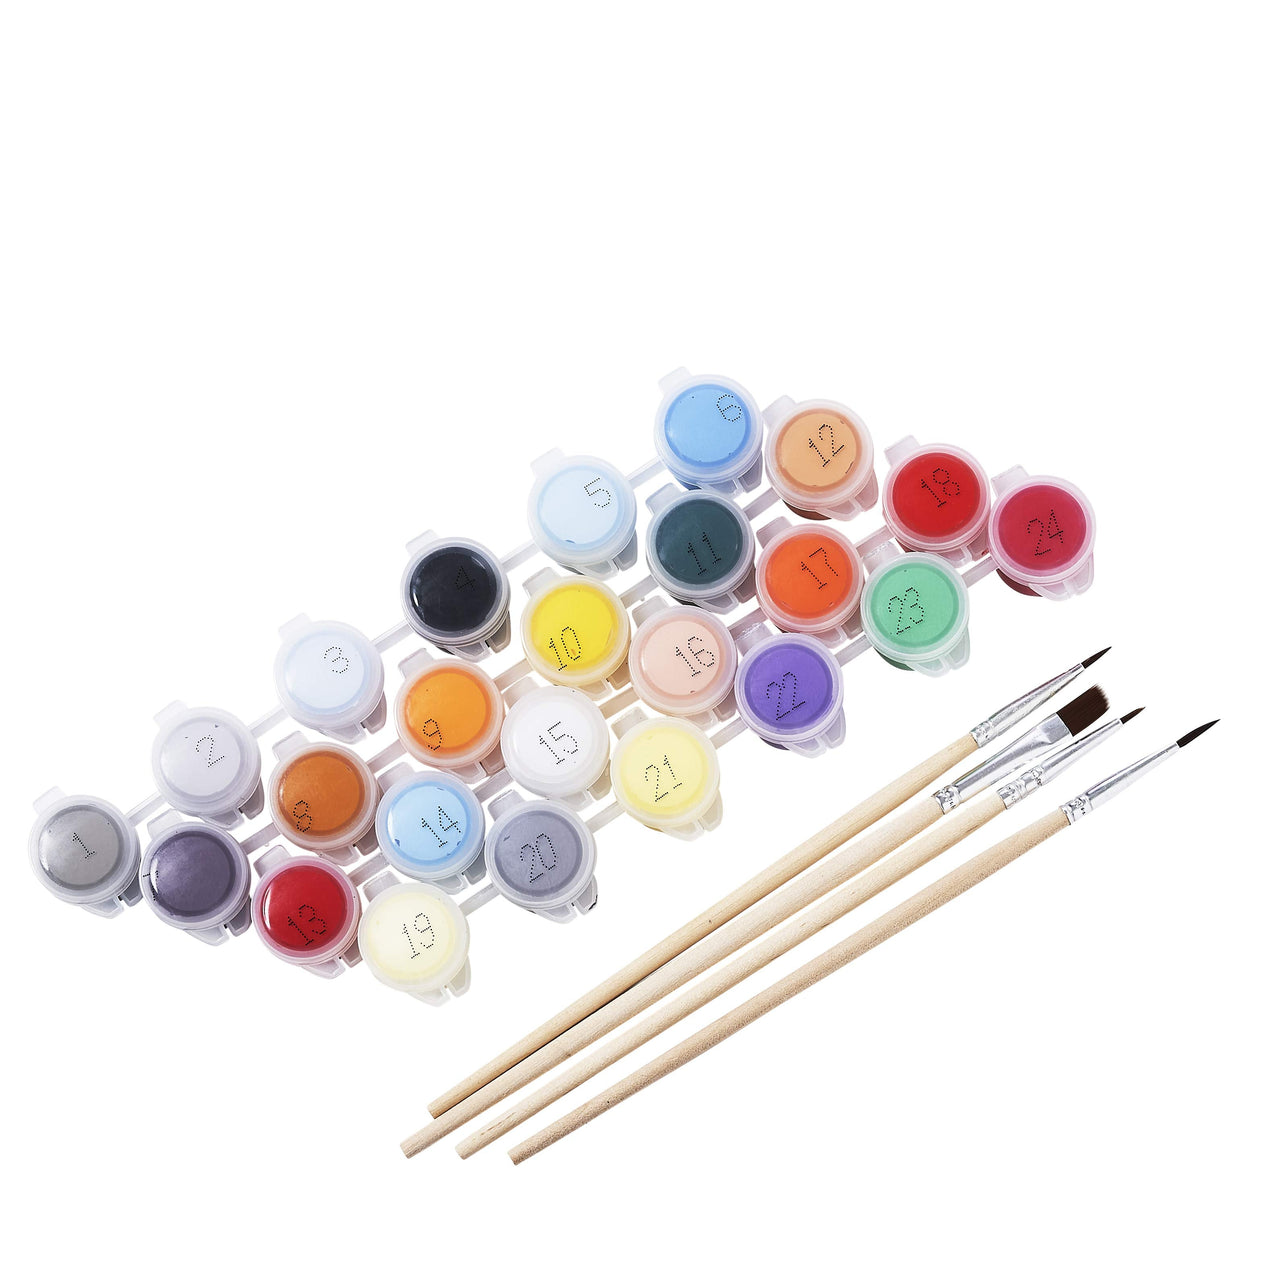 Paint Kit for Adults, Extra Paint Set